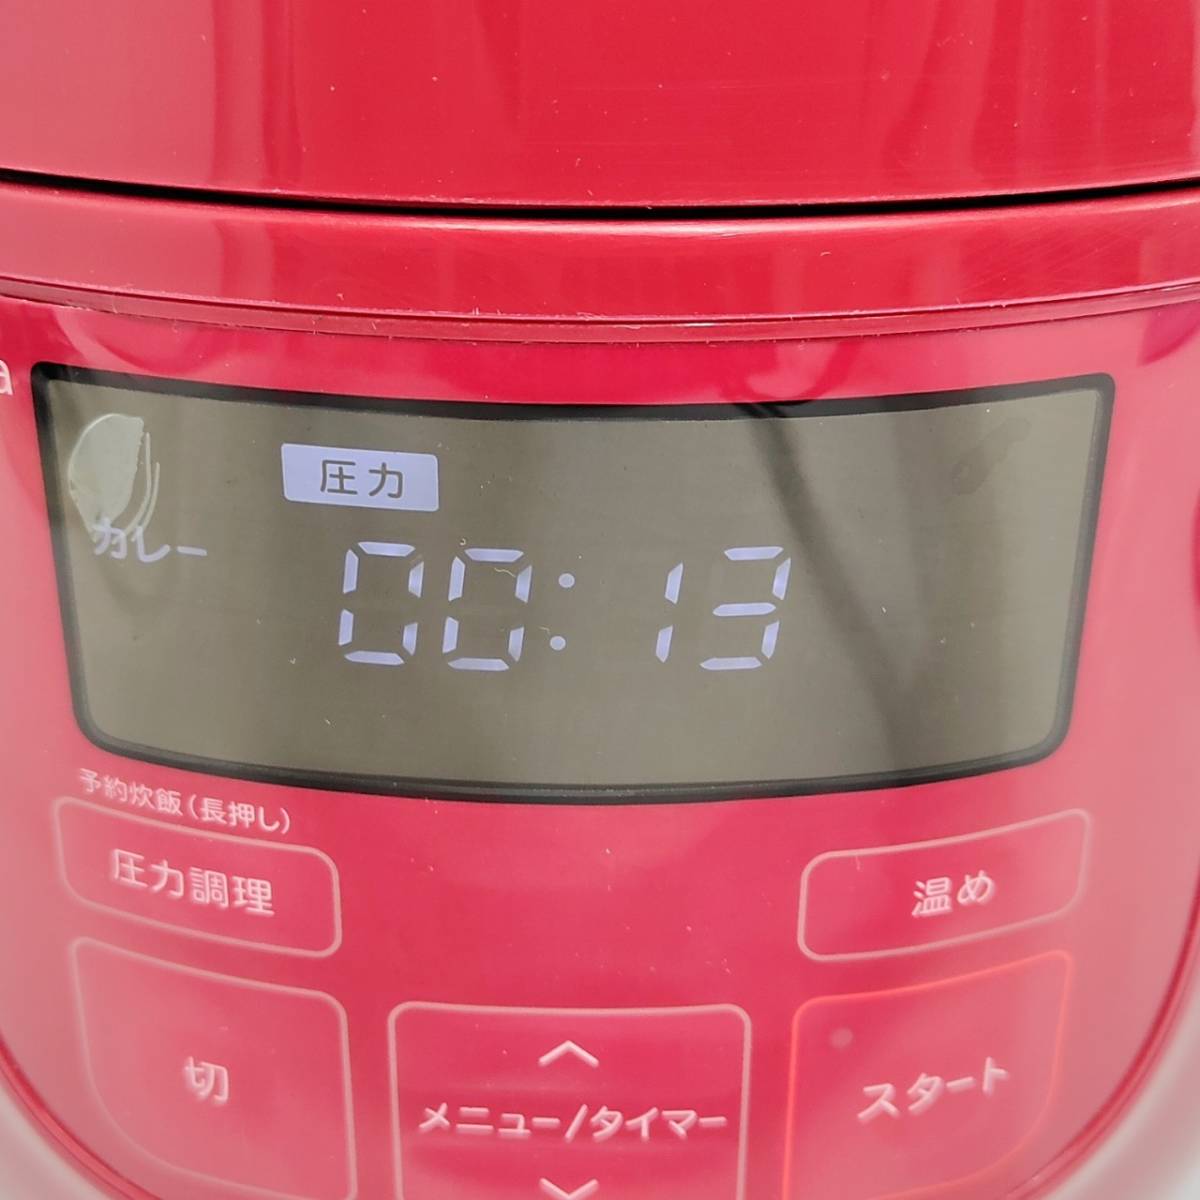 * operation goods white kaSP-D121 home use electric pressure cooker siroca red hour short cooking 5 kind p reset menu compact size kitchen cooking consumer electronics L753